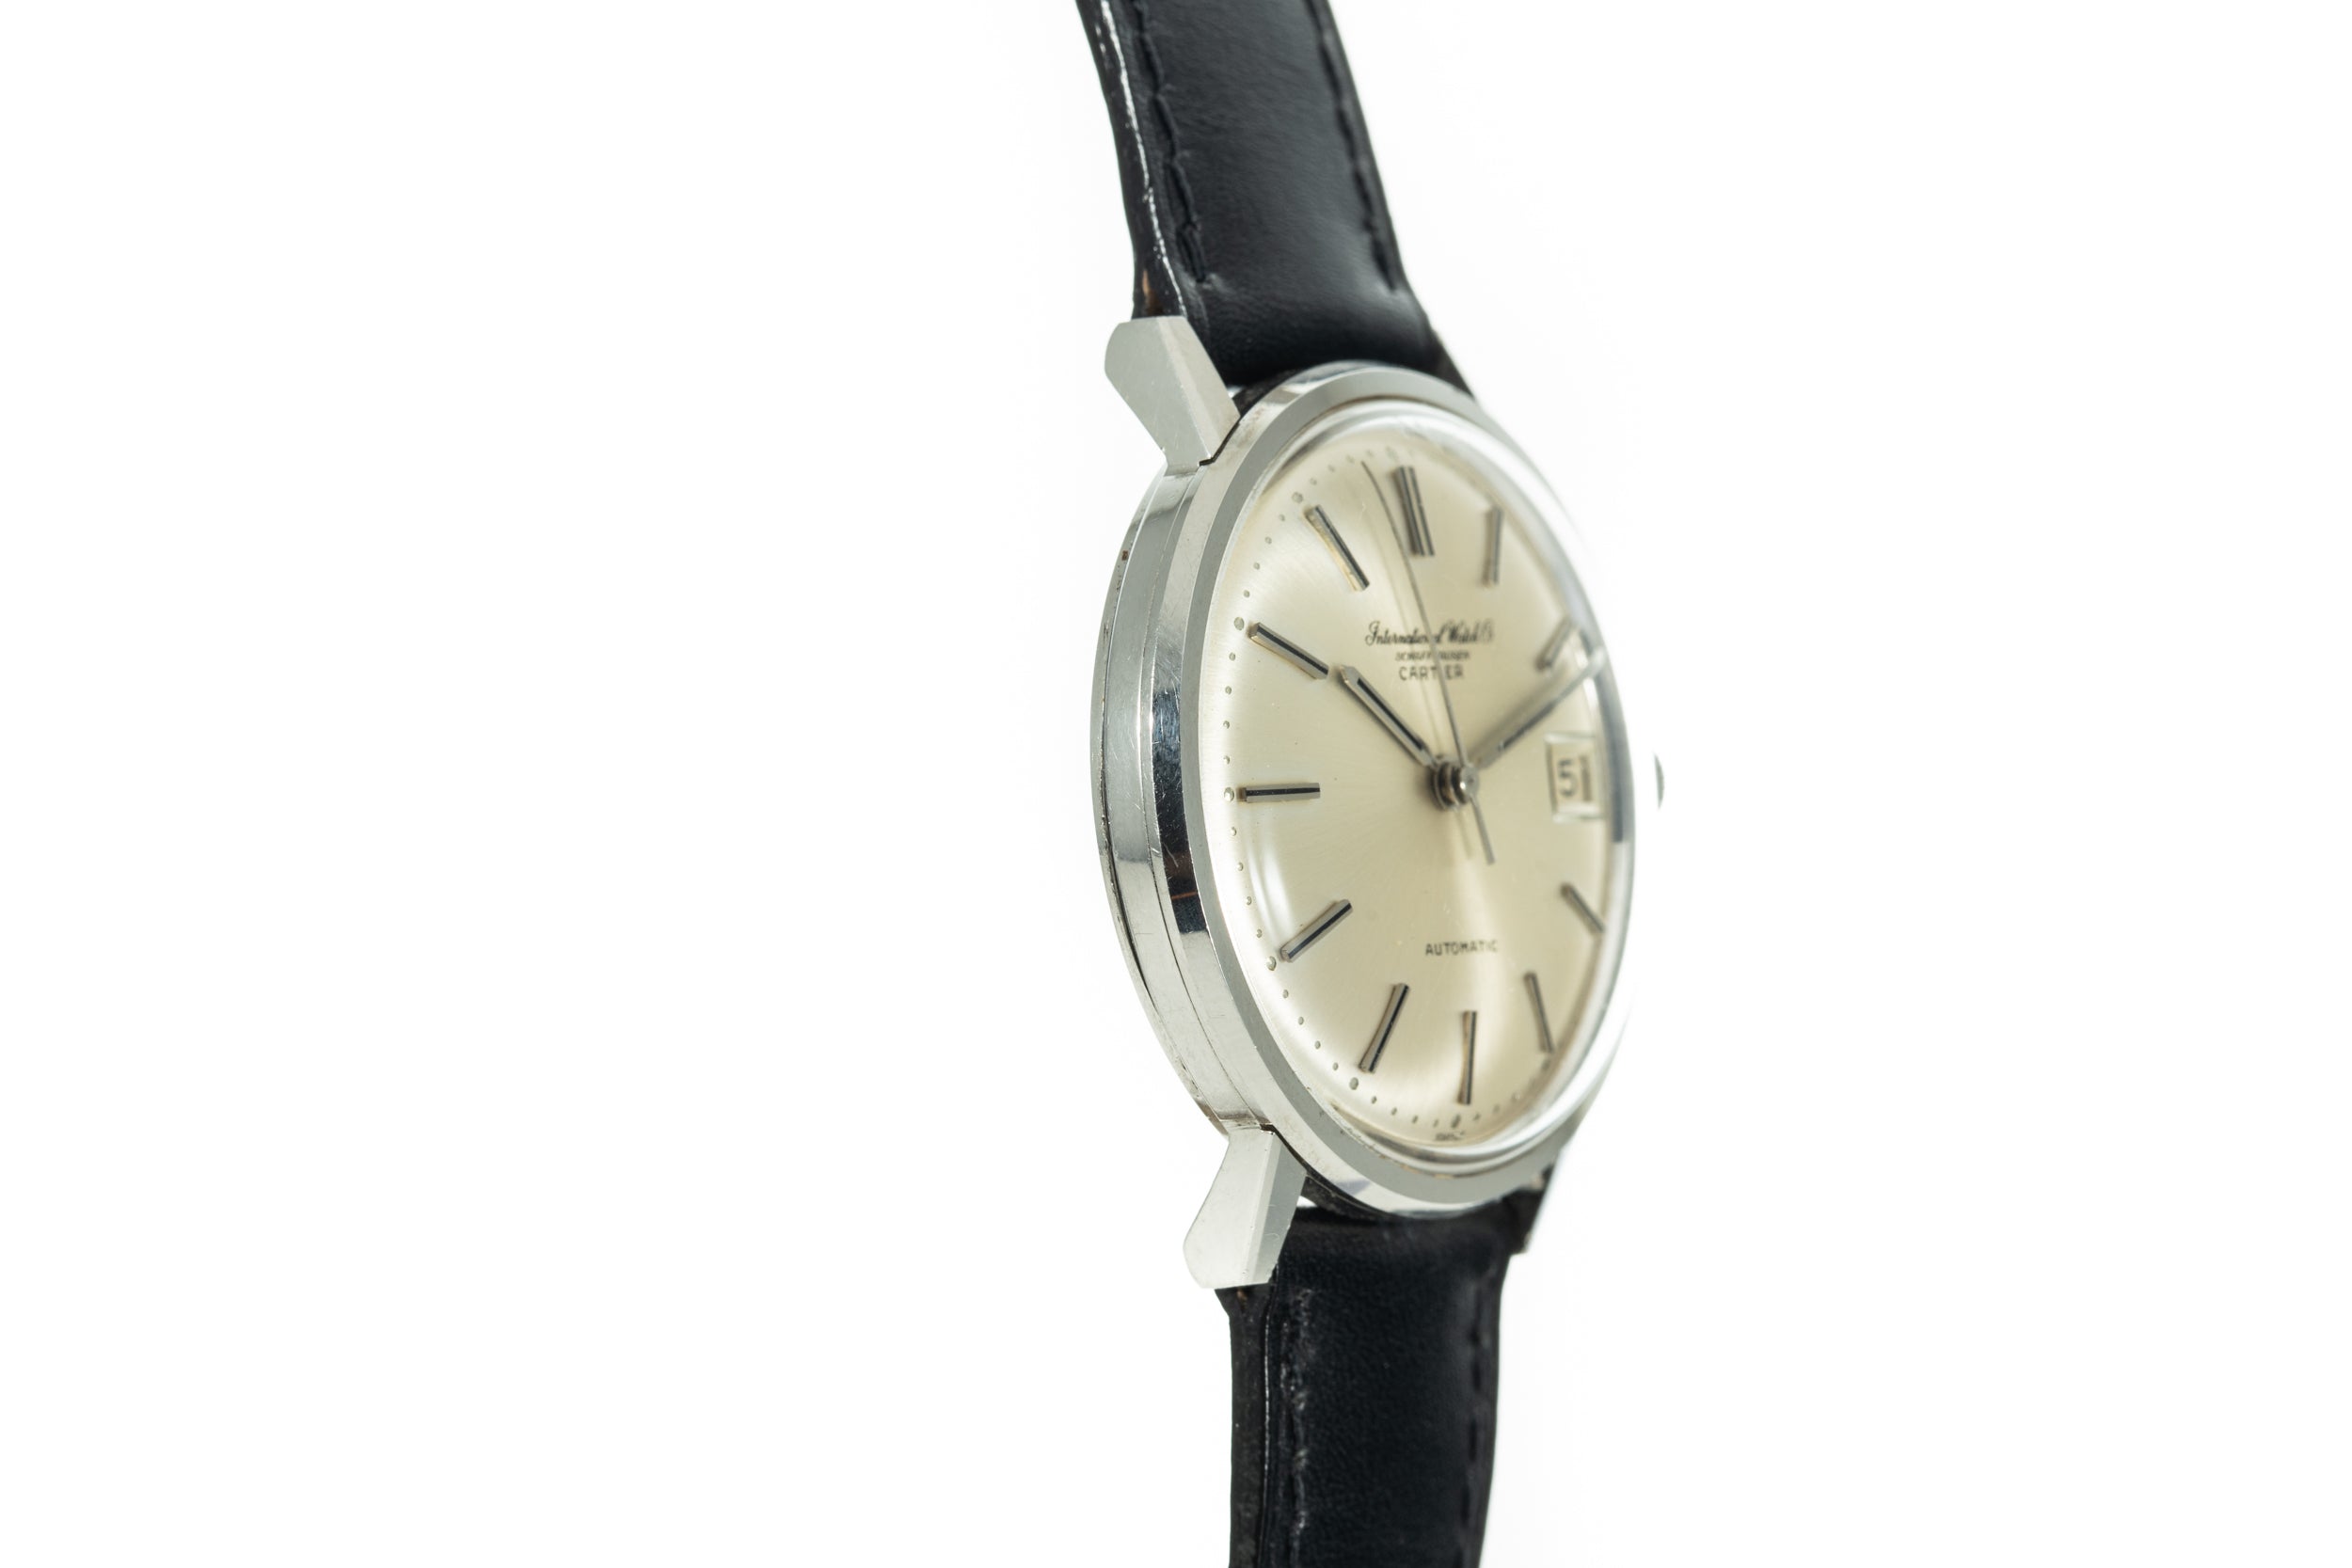 IWC Gent's Dress Watch Retailed by Cartier – Analog:Shift